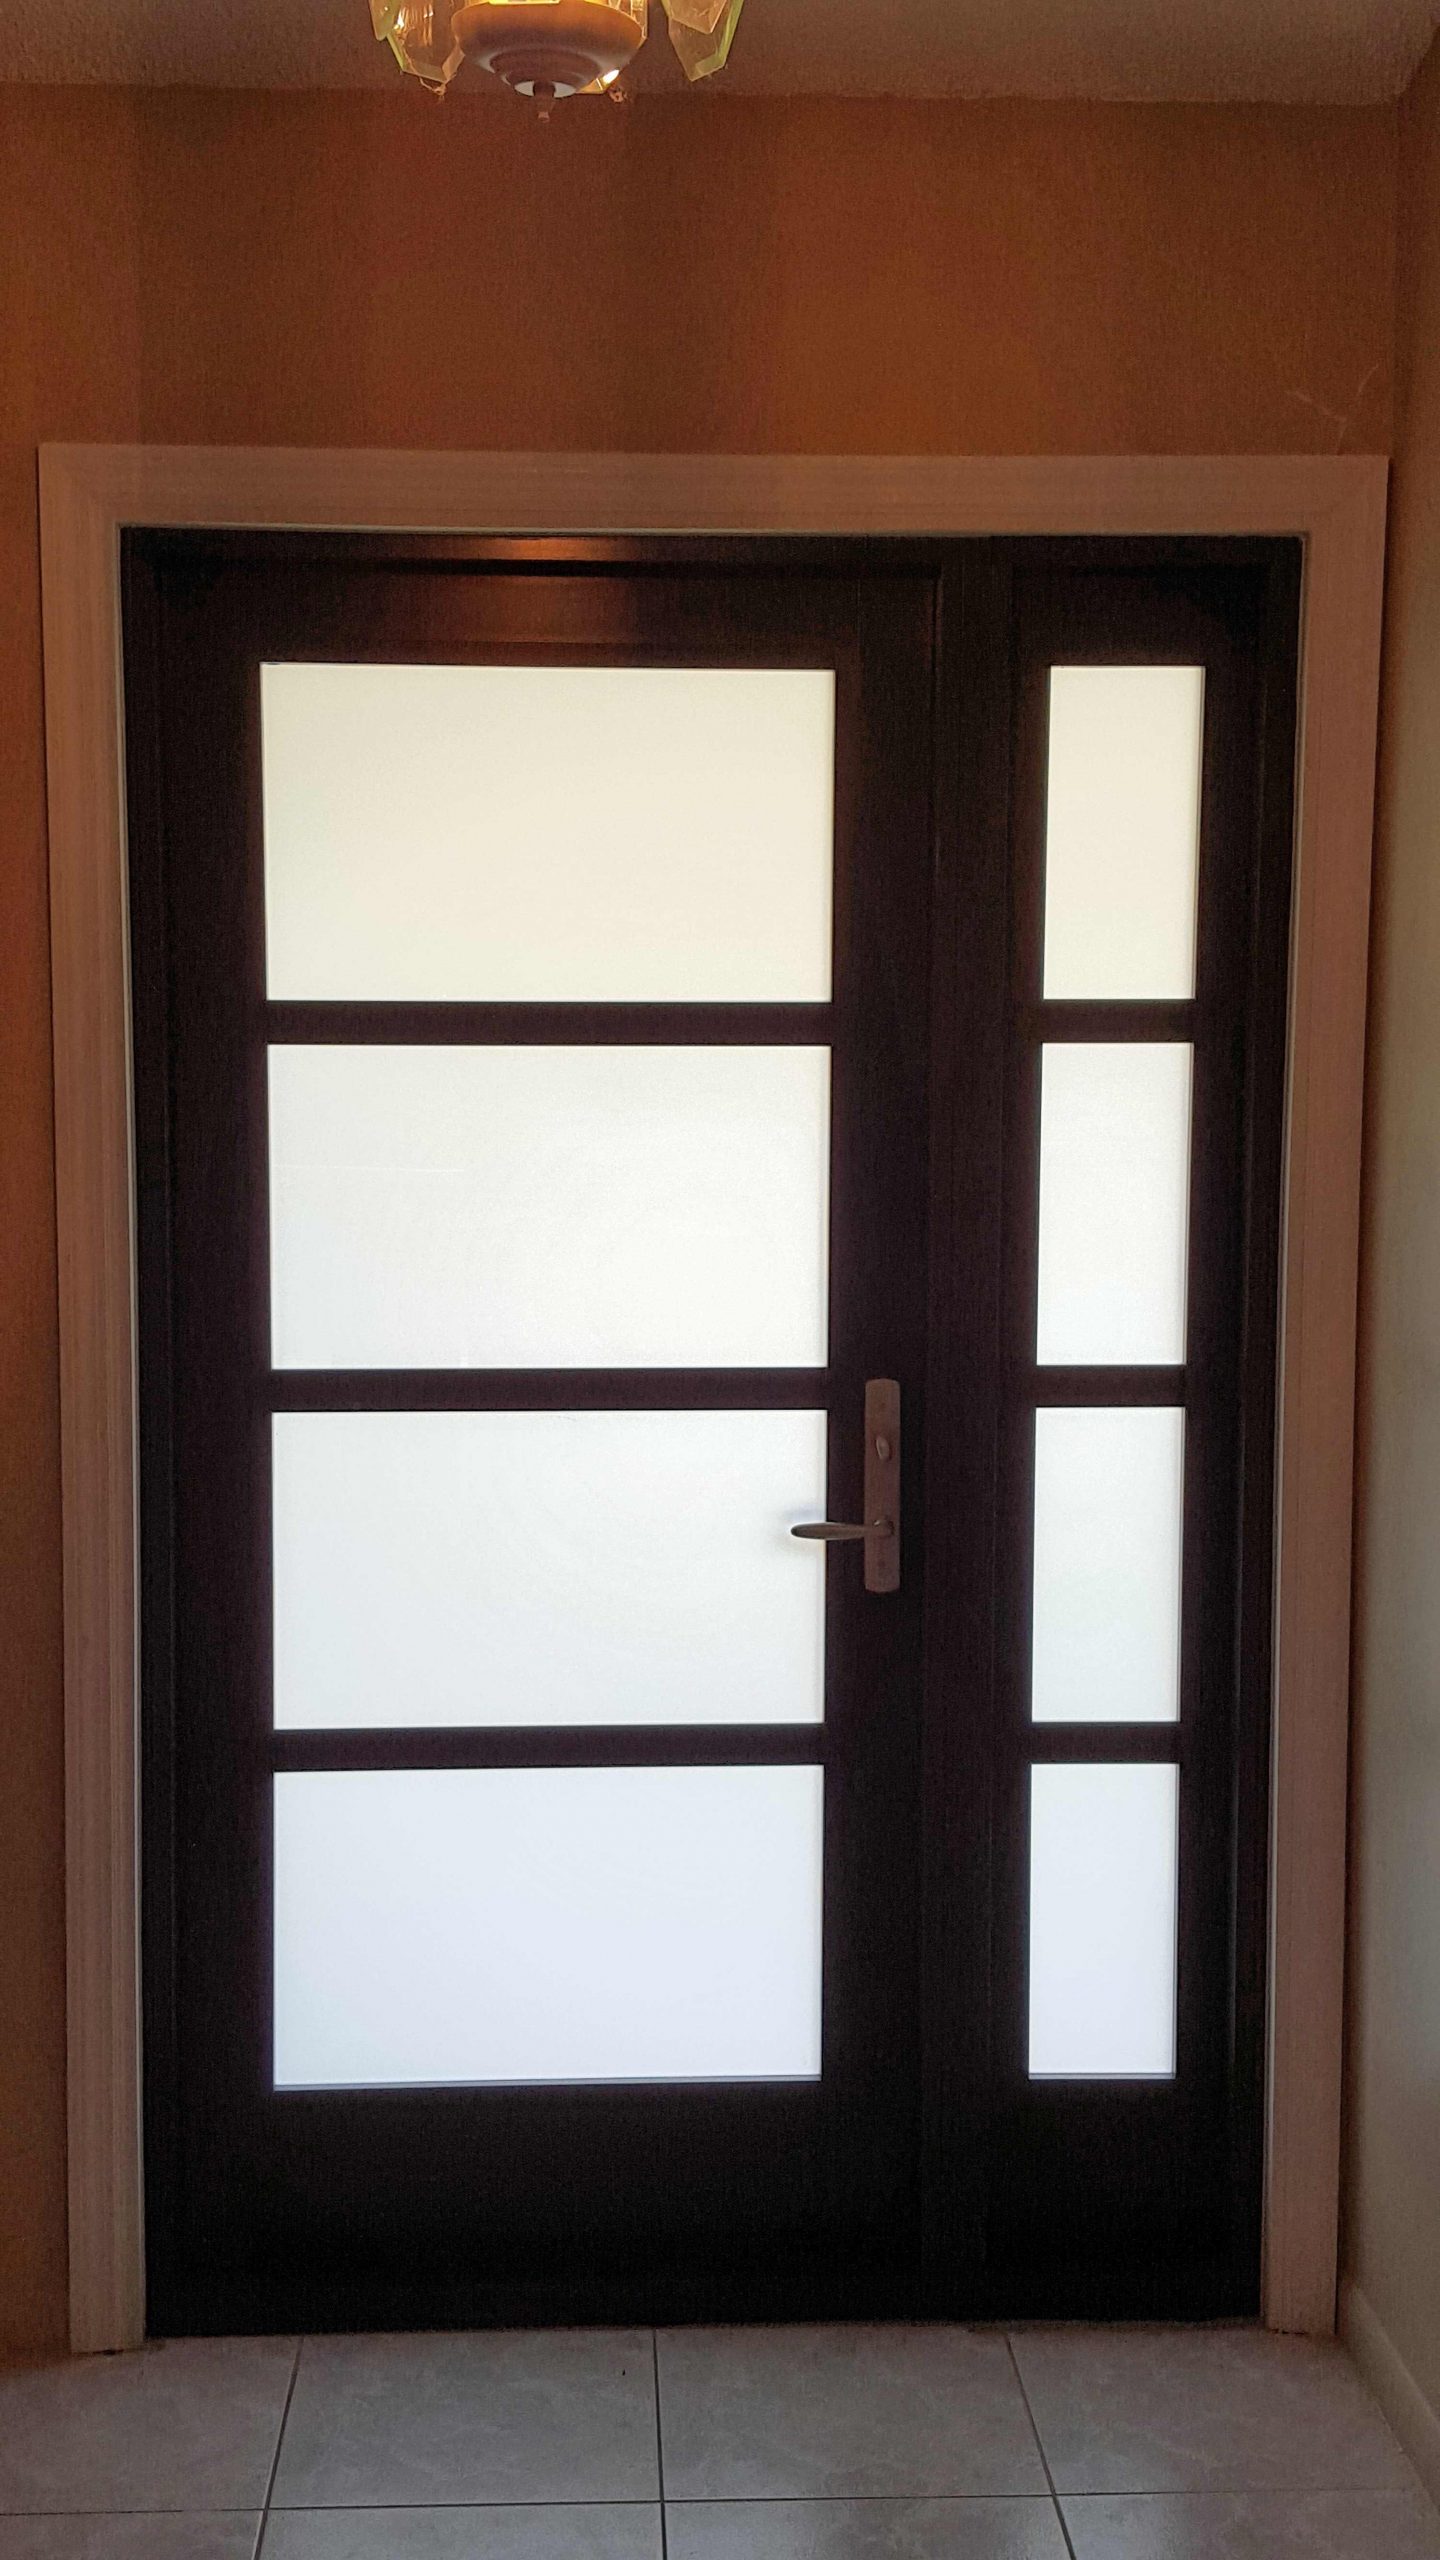 SIW Impact French Doors_ Job B 2 caption_ SIW Impact French Door with Sidelight and Mutins_White Privacy Innerlayer_Inside View